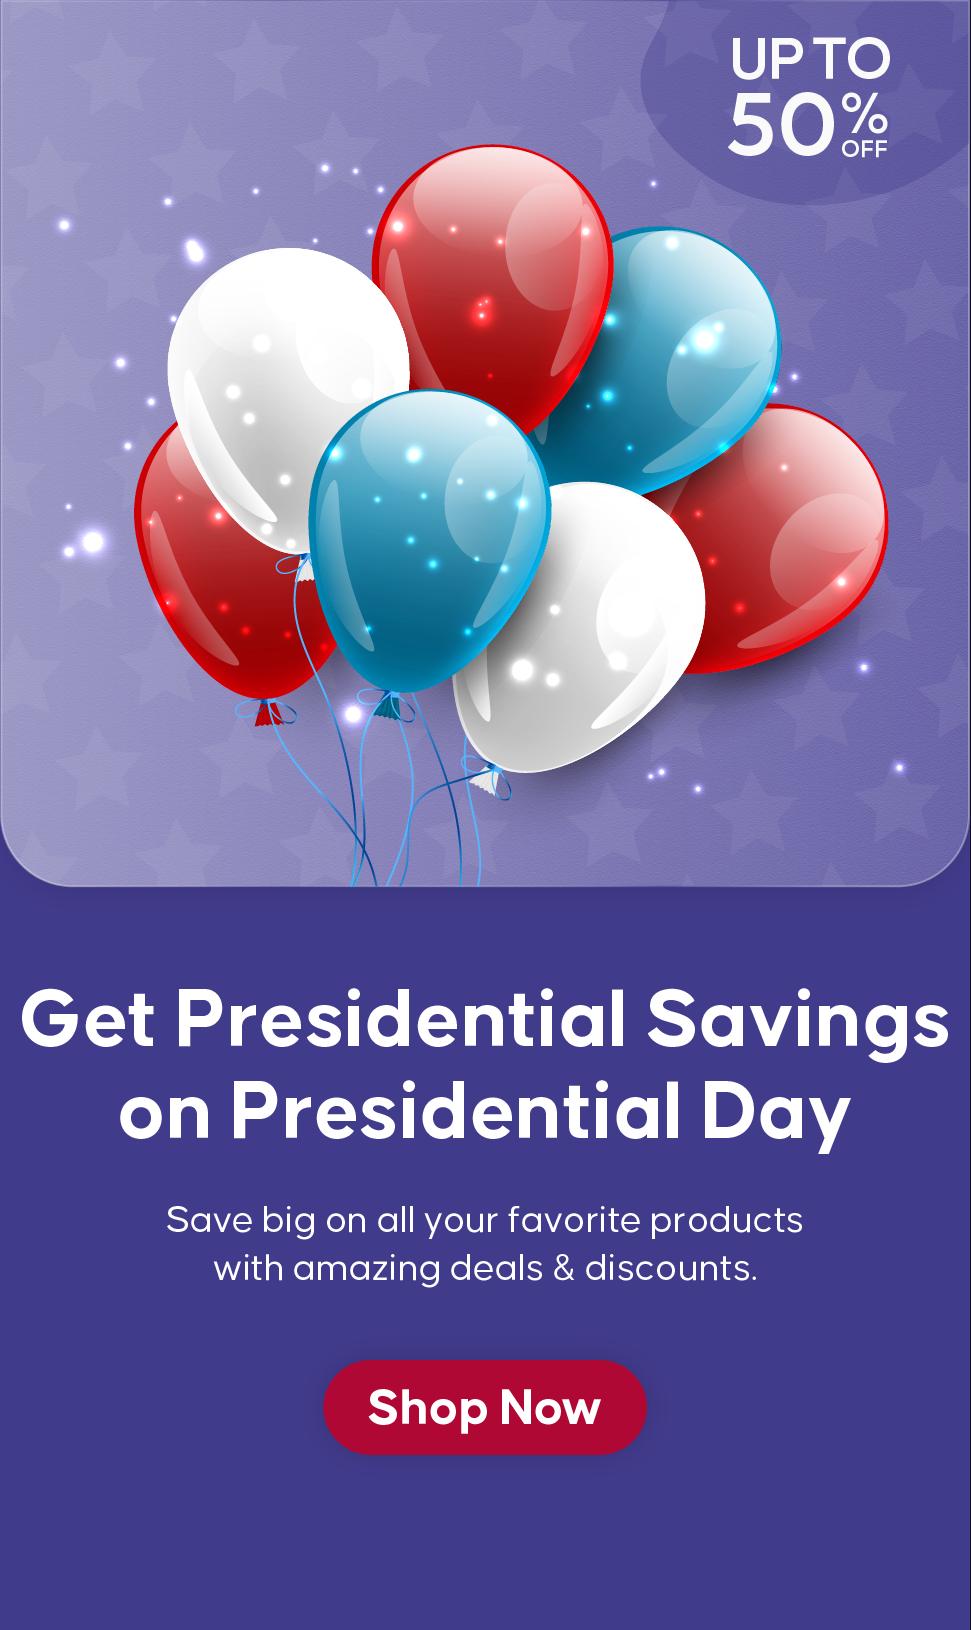 Get President day discounts and deals